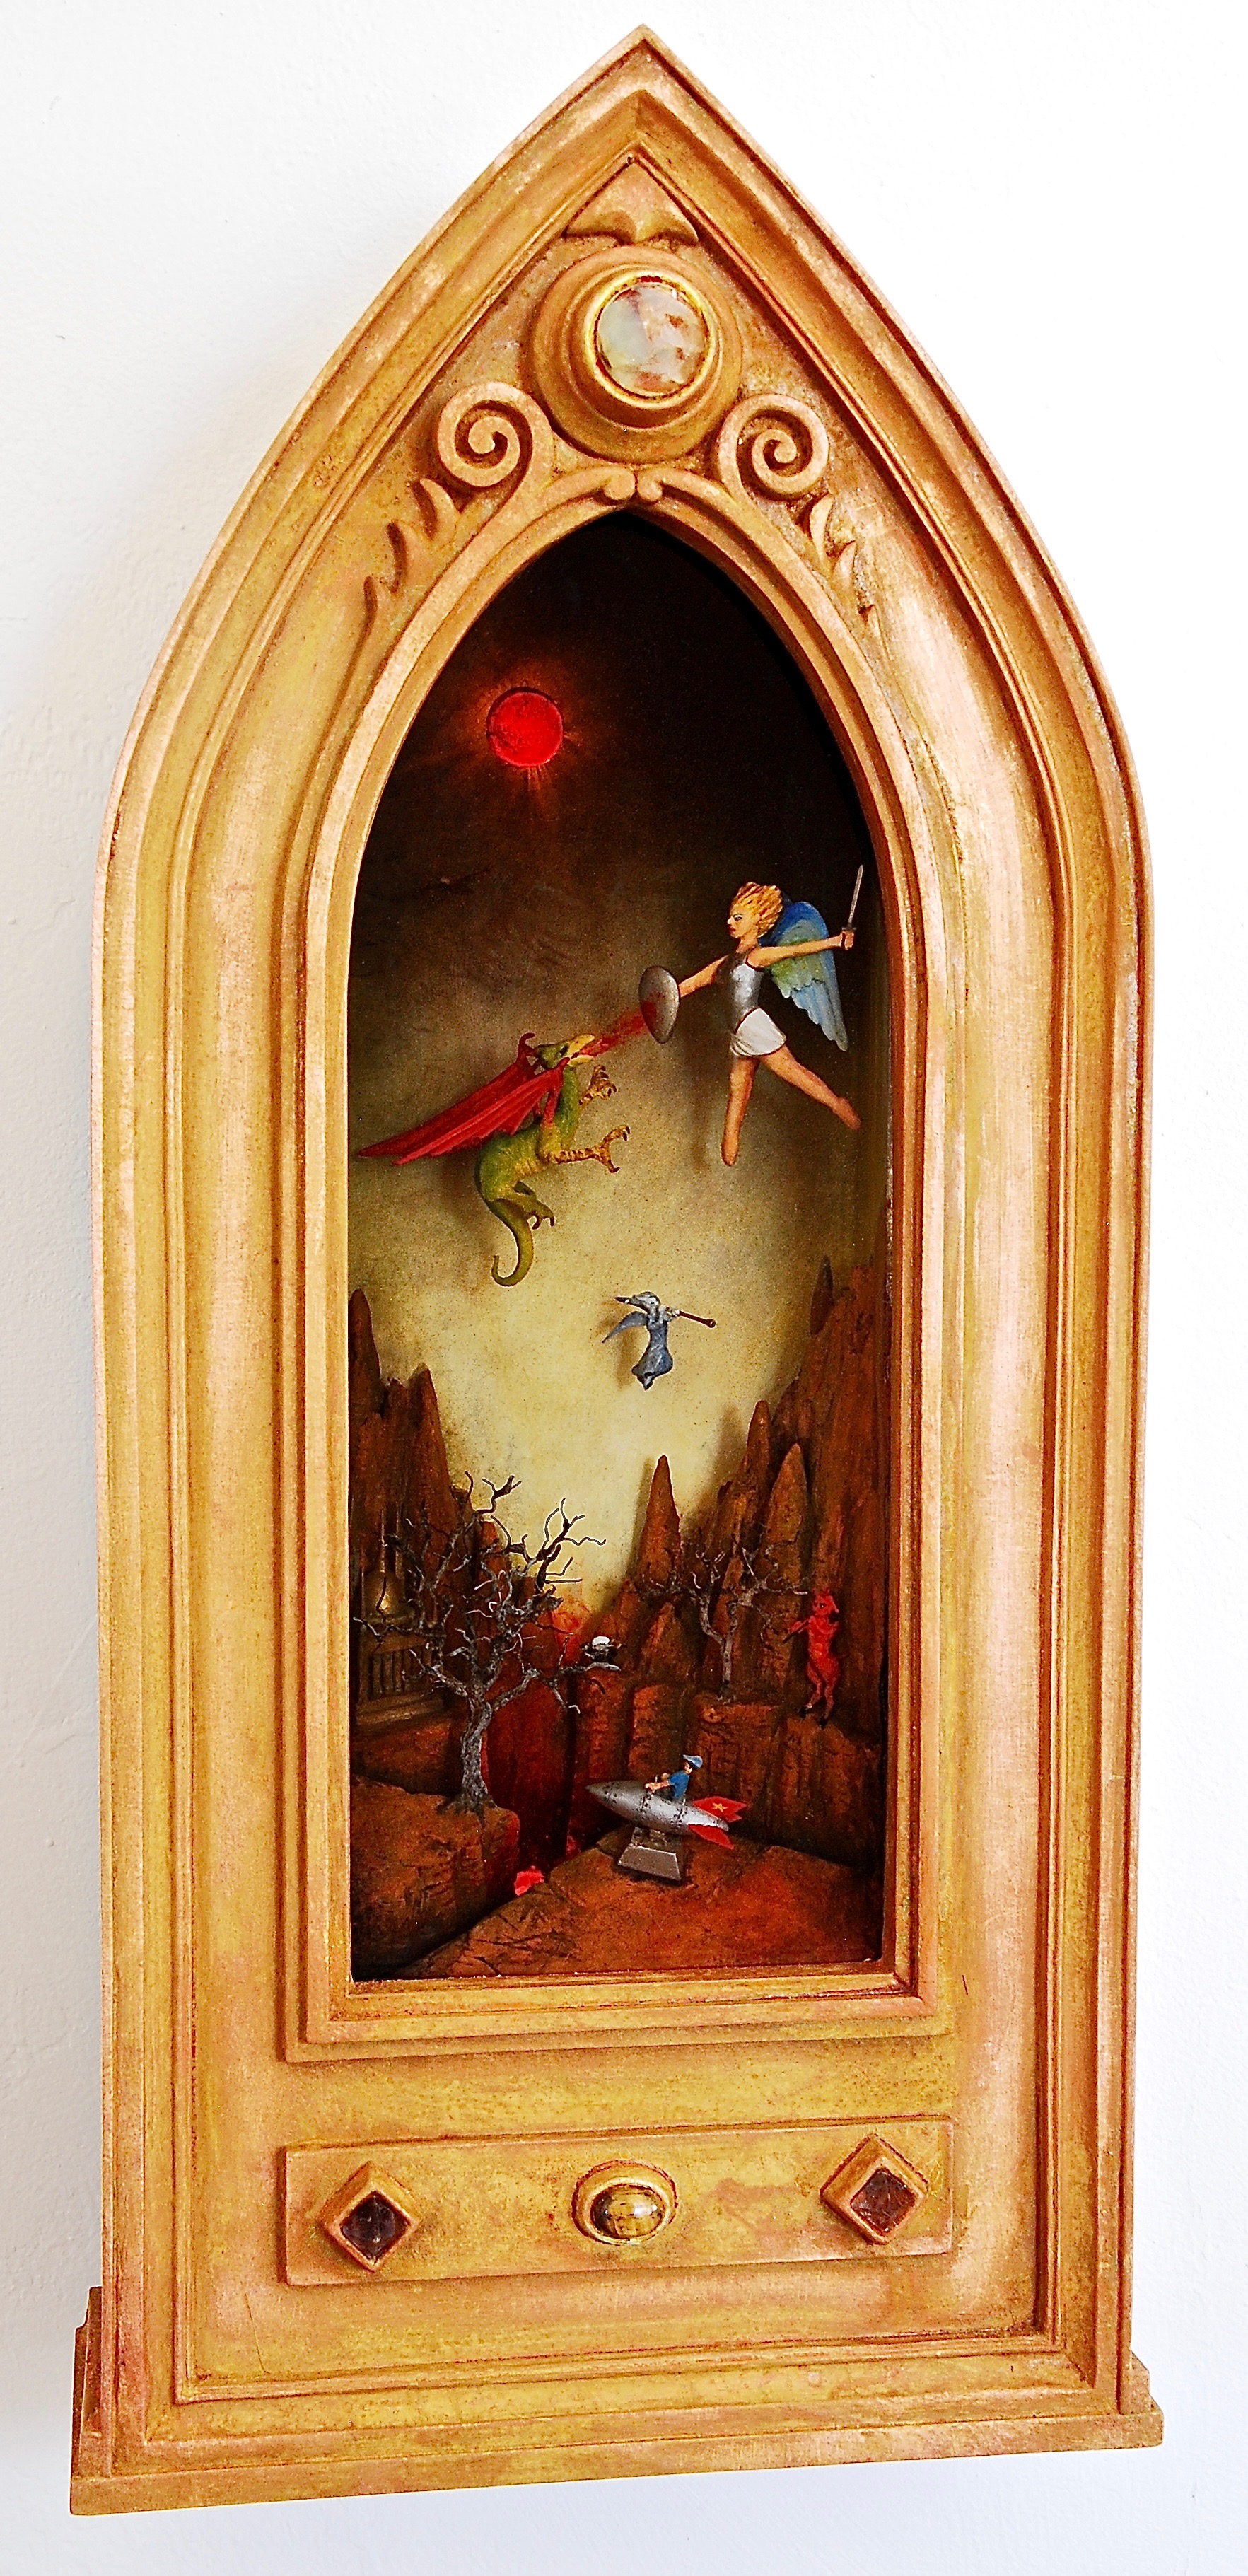   Thomas Coffin - Little Johnny's Rocket Ride, 18"h x 10"w x 4 1/2"d, mixed media 3-d diorama encased in acrylic resin, handmade wood frame, copper leaf  